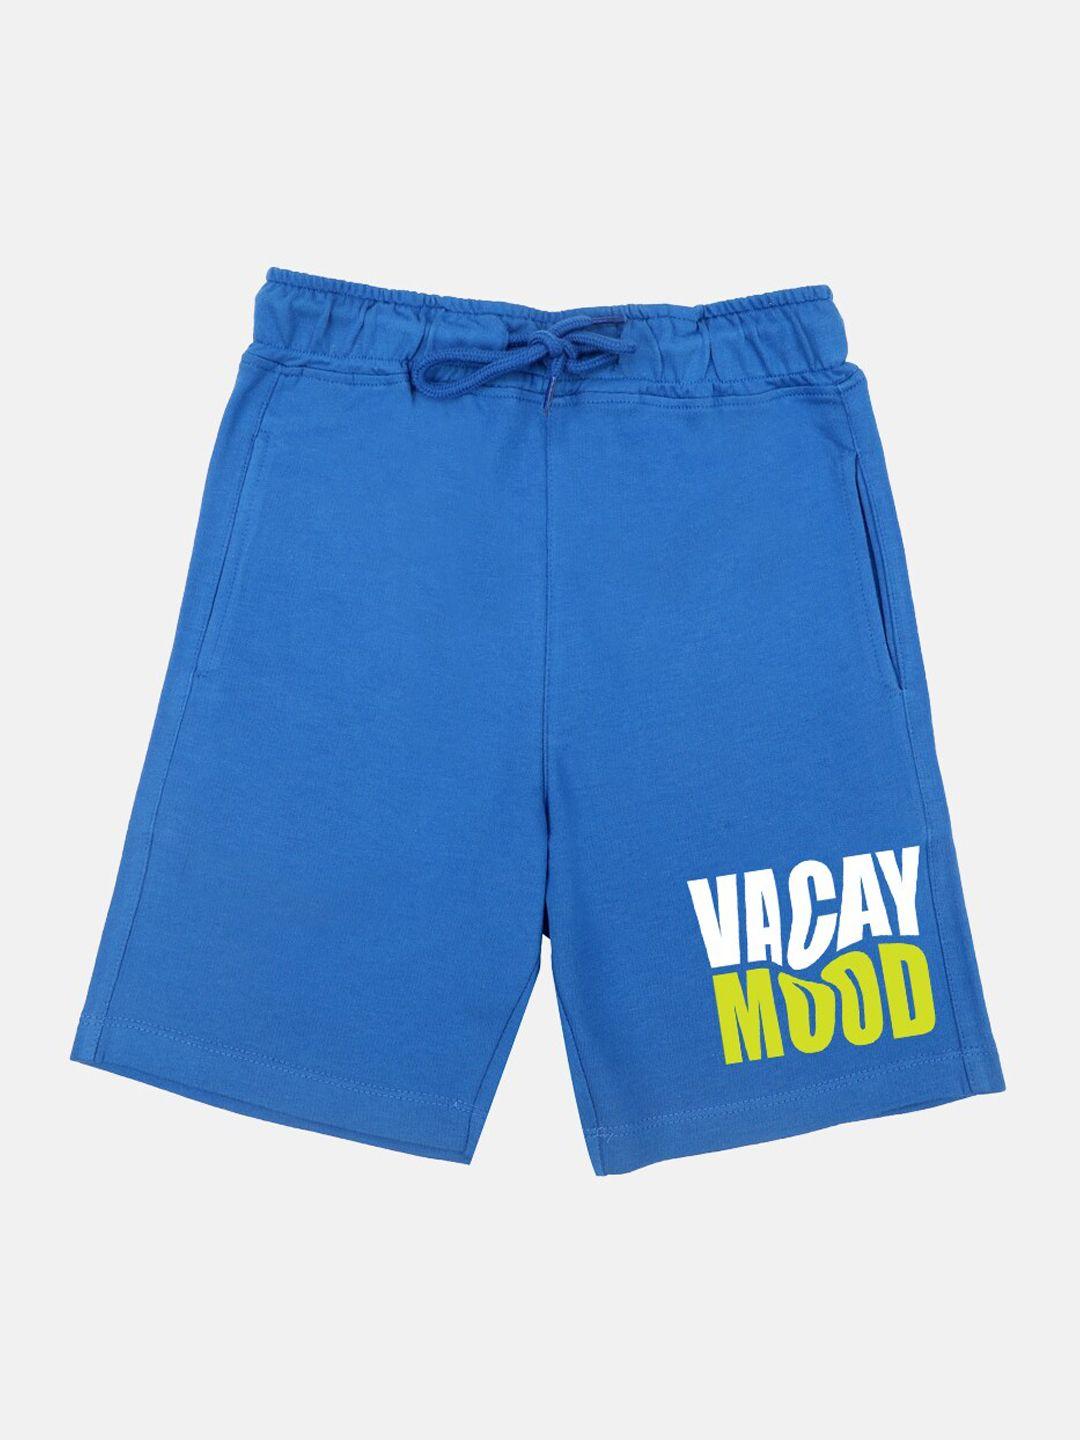 yk boys typography printed mid-rise outdoor shorts